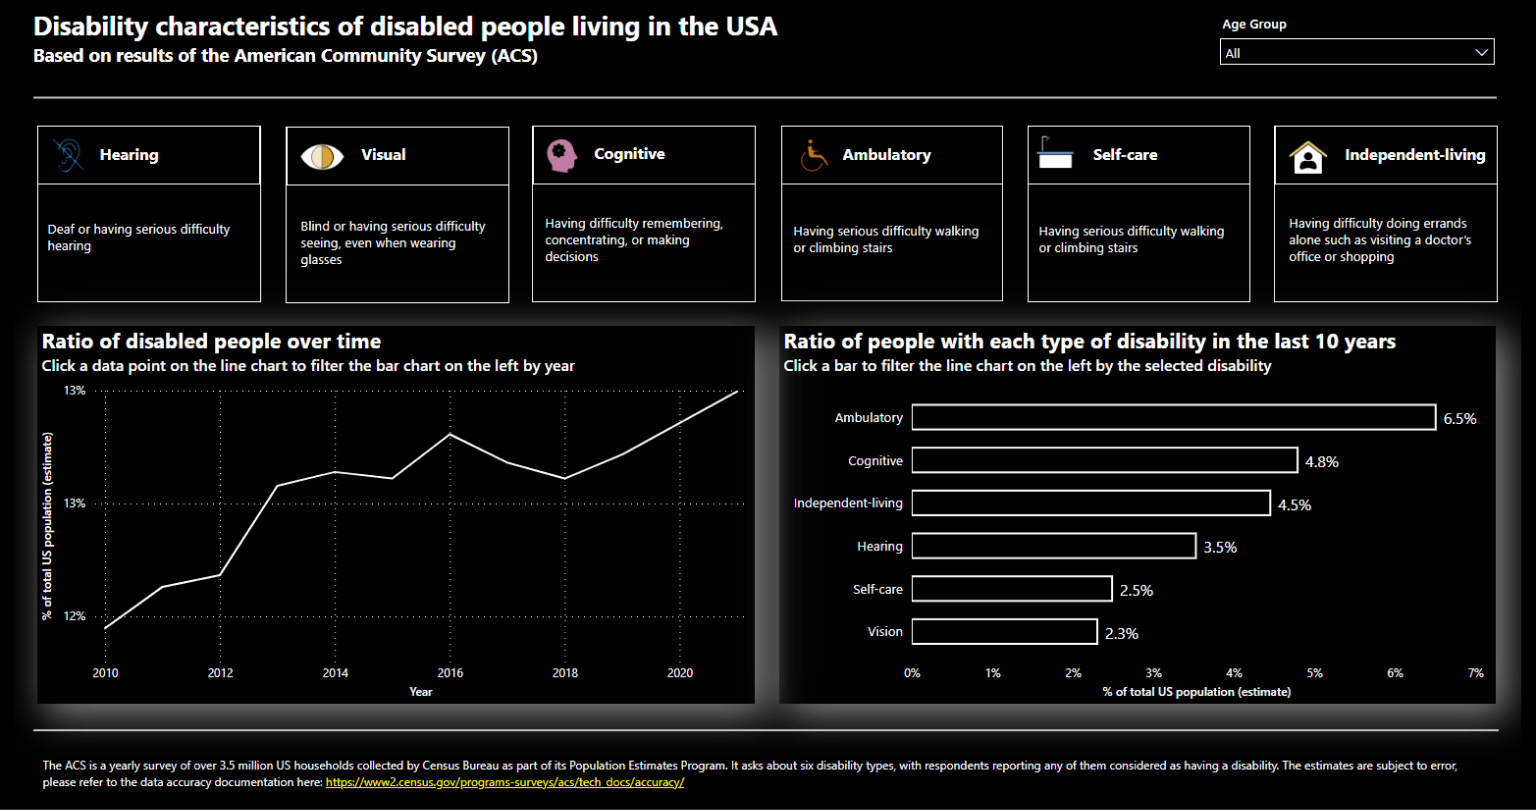 Screenshot of the Disability characteristics of disabled people living in the USA dashboard using Power BI’s high contrast mode. The background is black, all charts, texts and slicers are white.